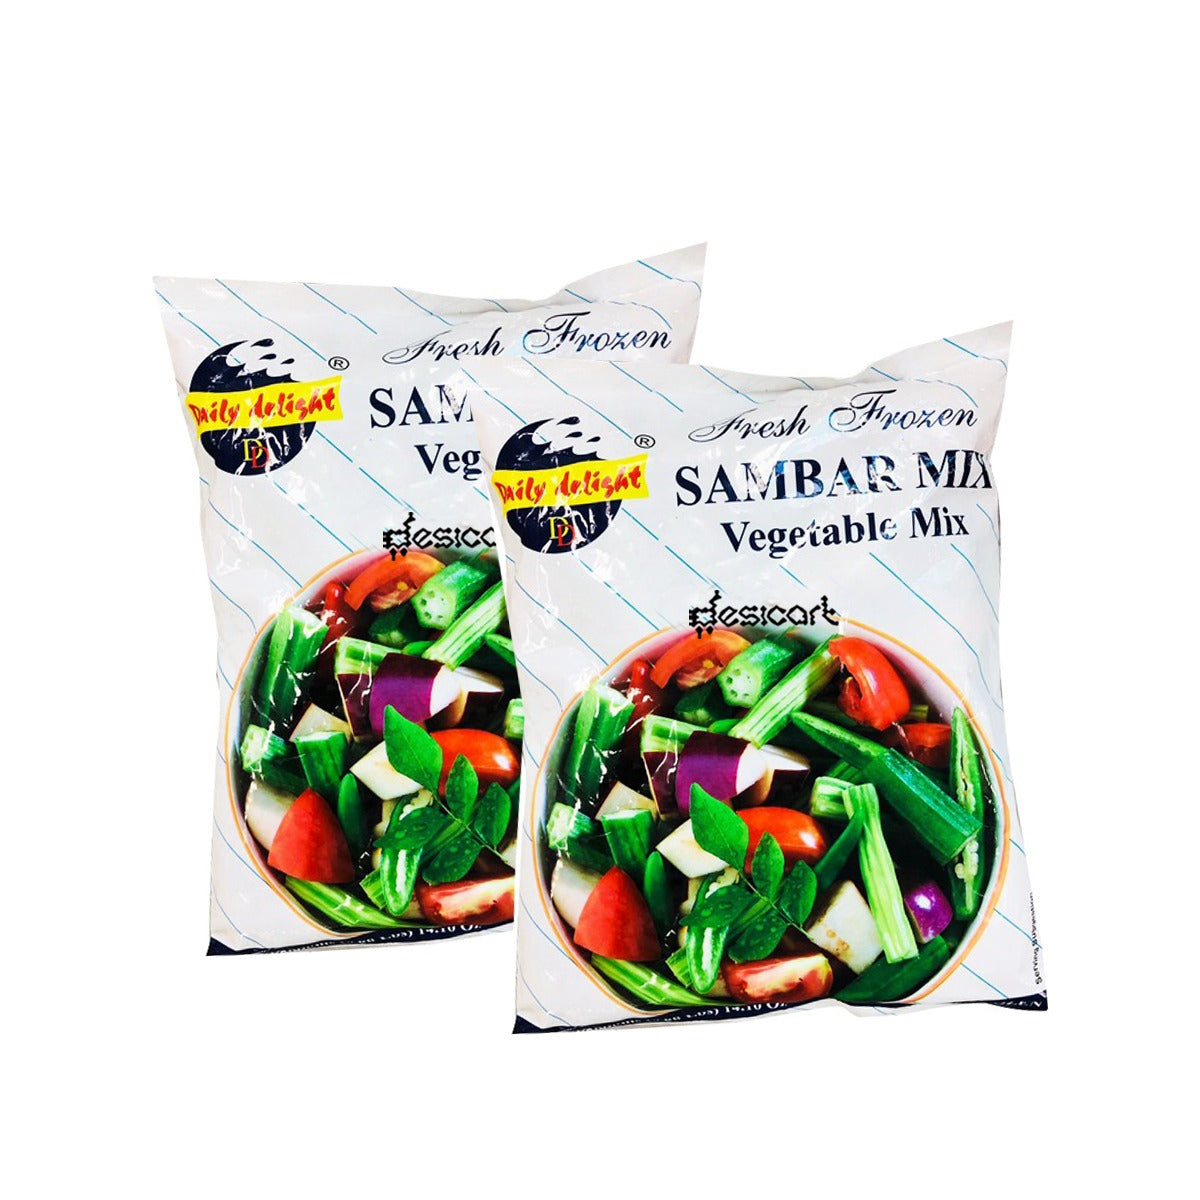 DAILY DELIGHT SAMBAR MIX 400G (PACK OF 2) 